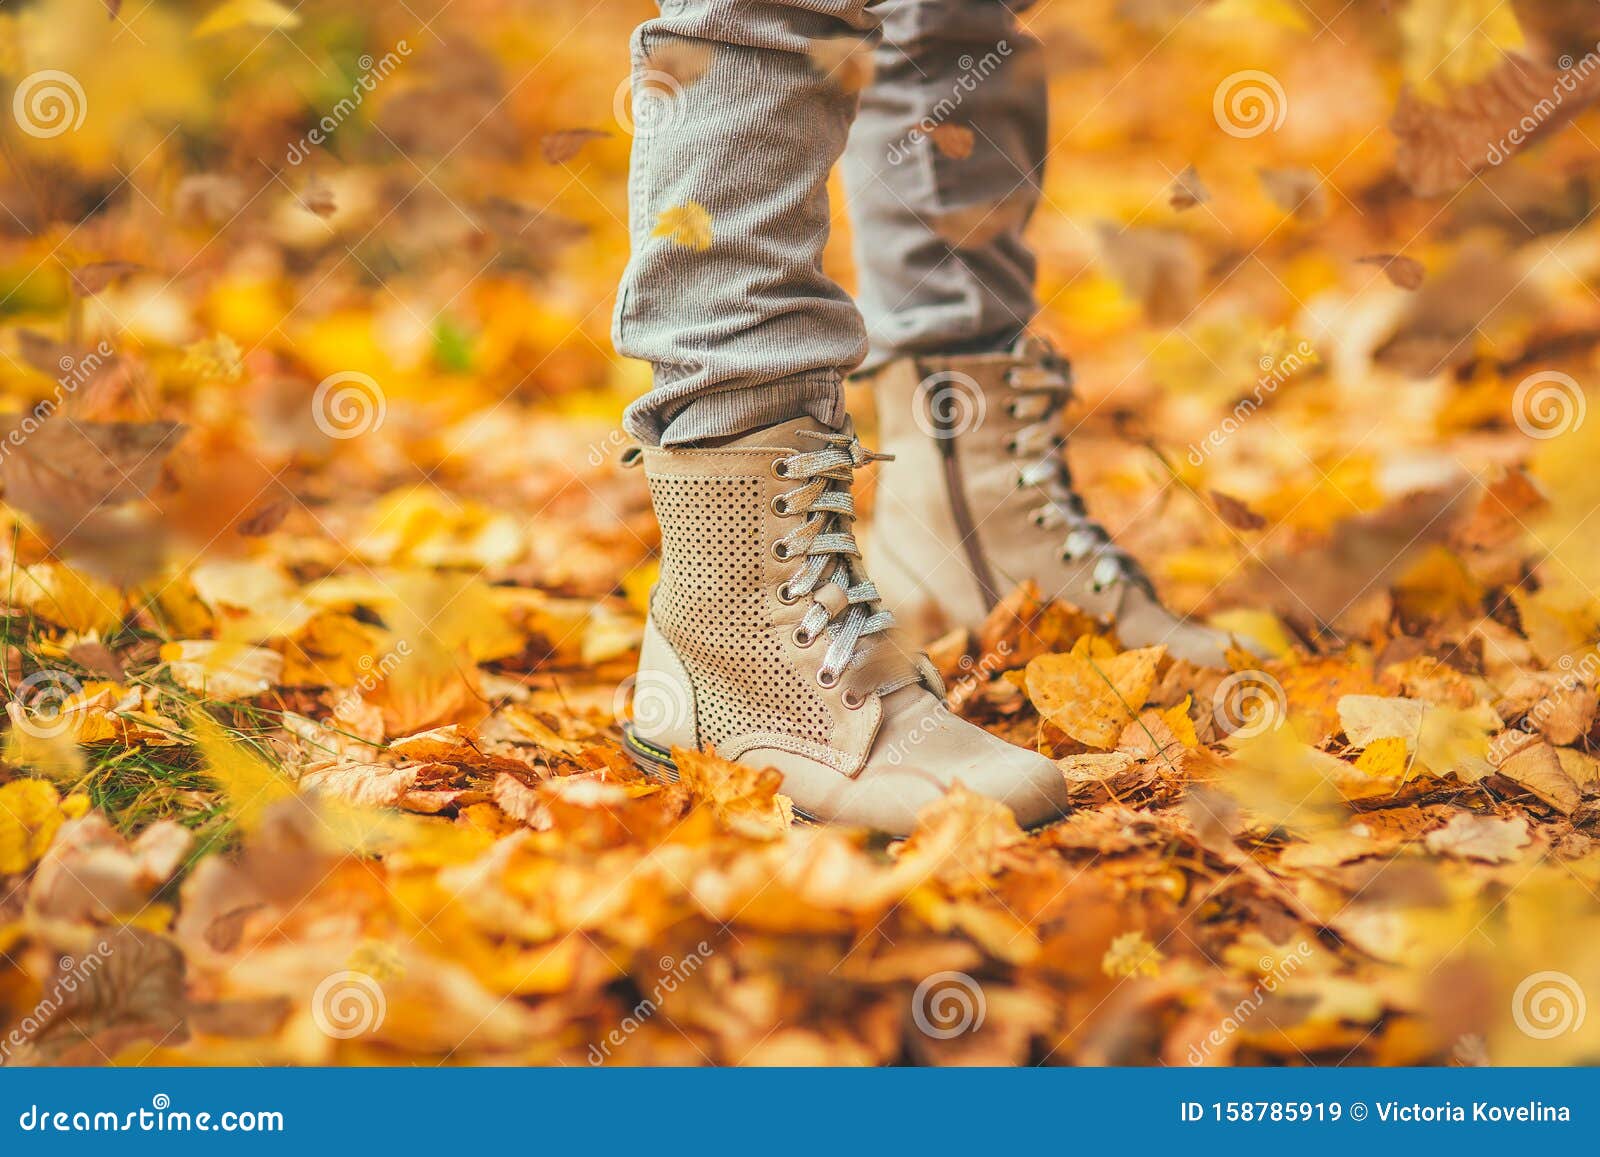 Smeren tofu ondersteboven Autumn. the Girl is Walking in the Park. Shoes in the Autumn Foliage. Walk  in the Autumn Park. Lifestyle Stock Image - Image of female, lying:  158785919